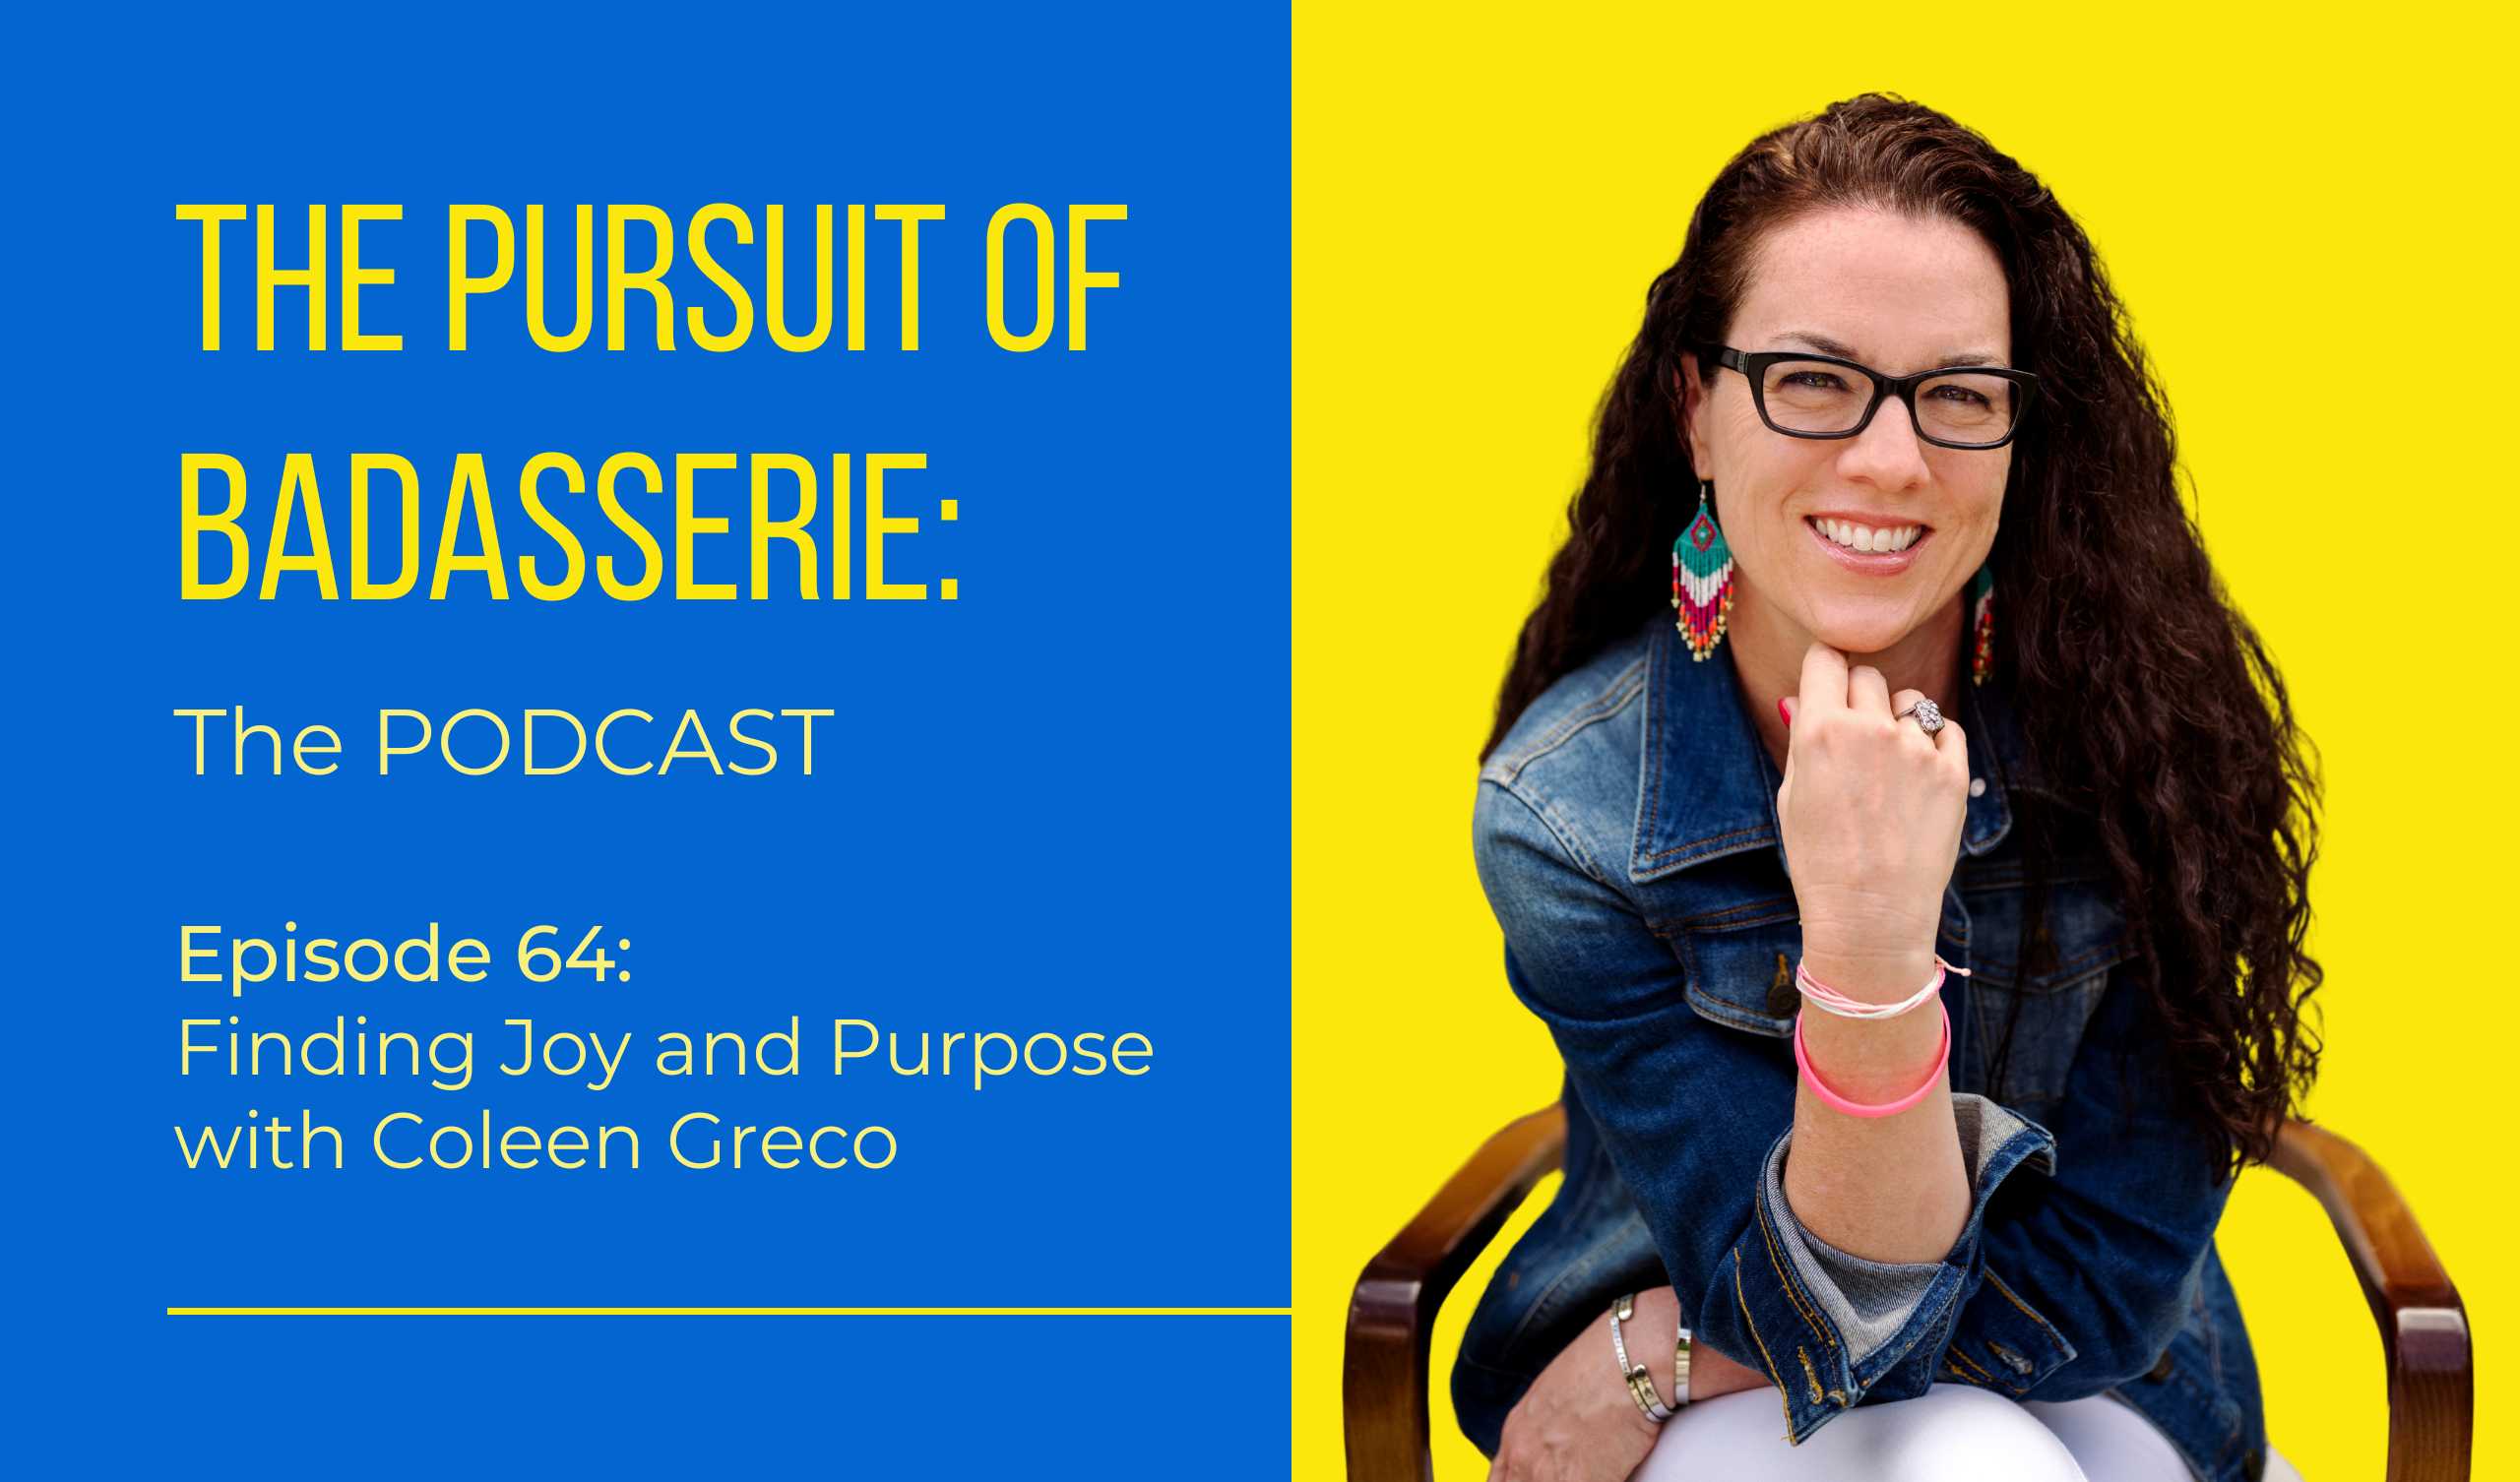 Coleen Greco on The Pursuit of Badasserie